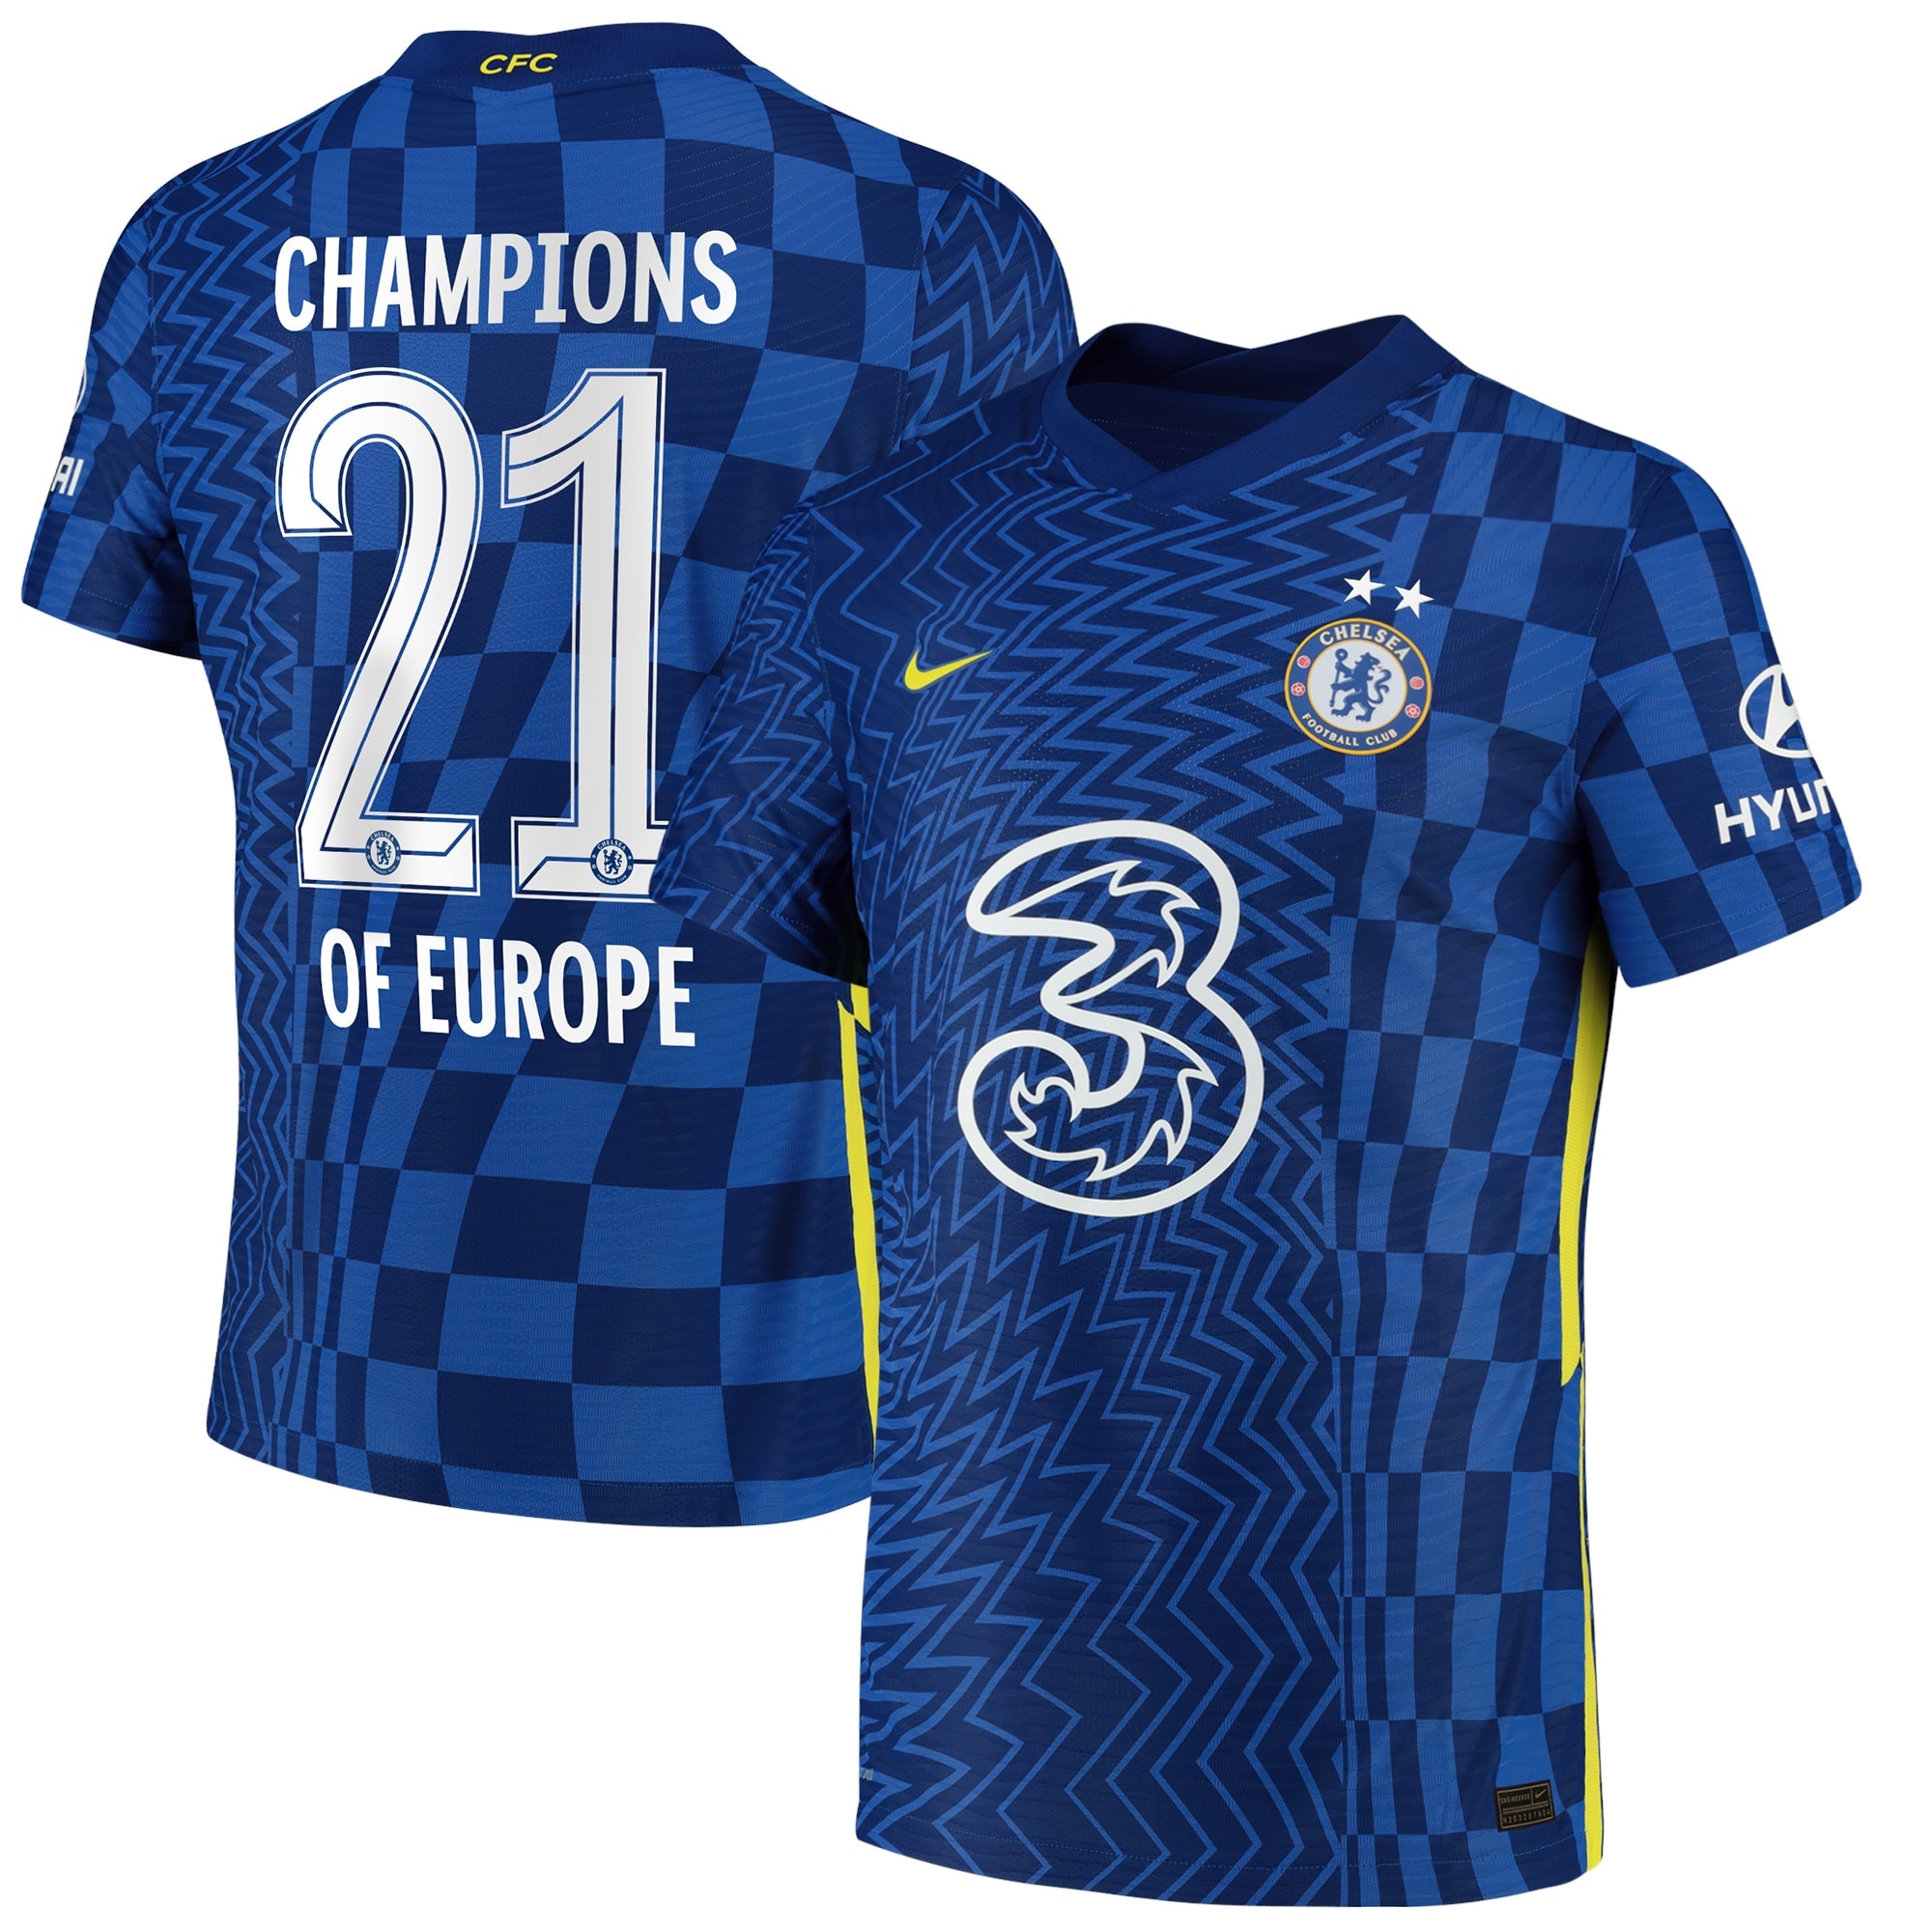 Chelsea Cup Home Vapor Match Shirt 2021-22 with Champions of Europe 21 printing